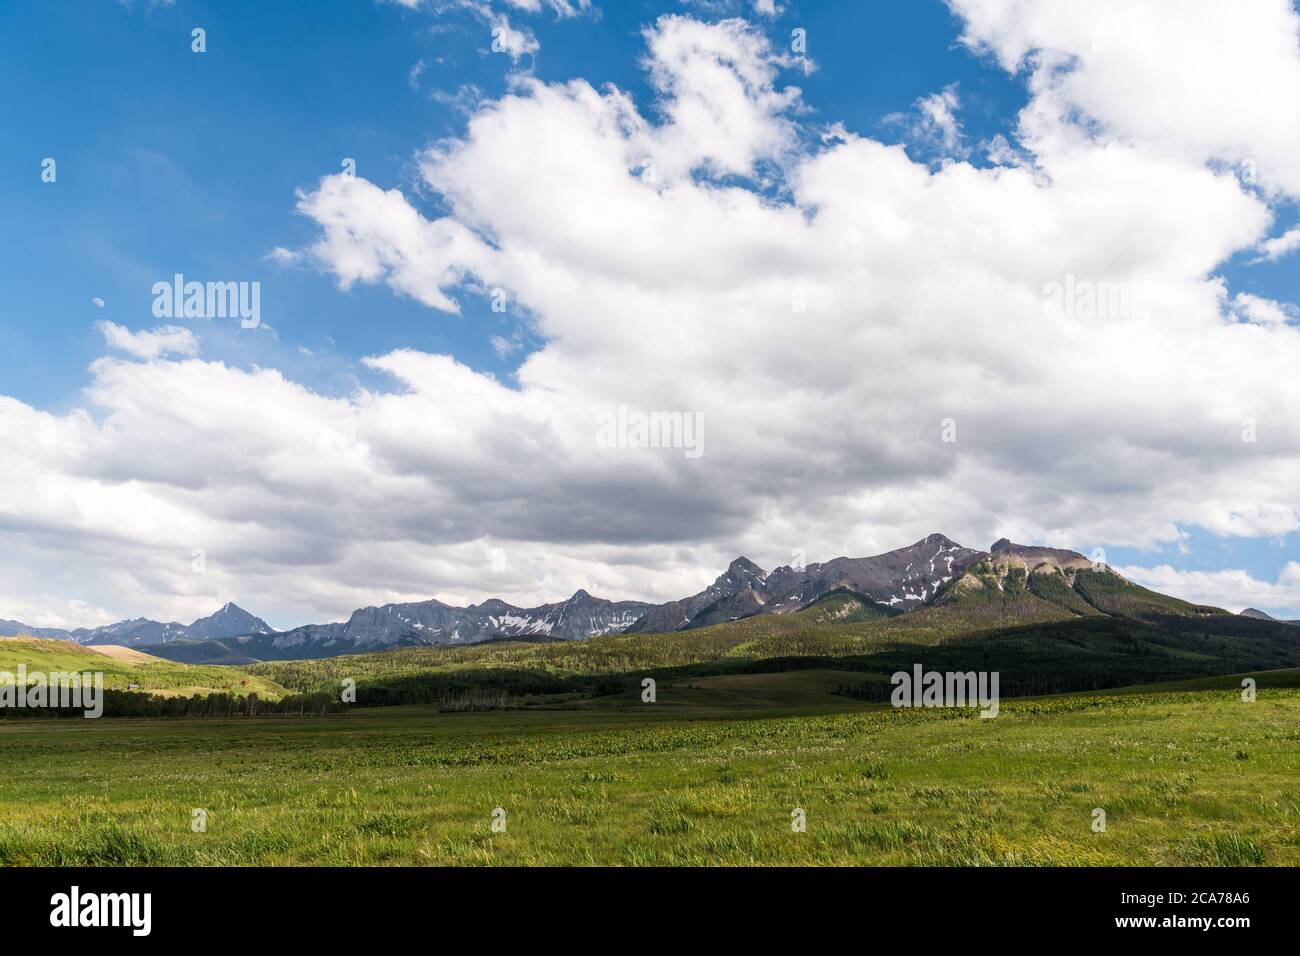 Lush green, grassy fields dotted with wildflowers in open ranchland below the snow-capped San Juan mountains in southwestern Colorado, UA Stock Photo